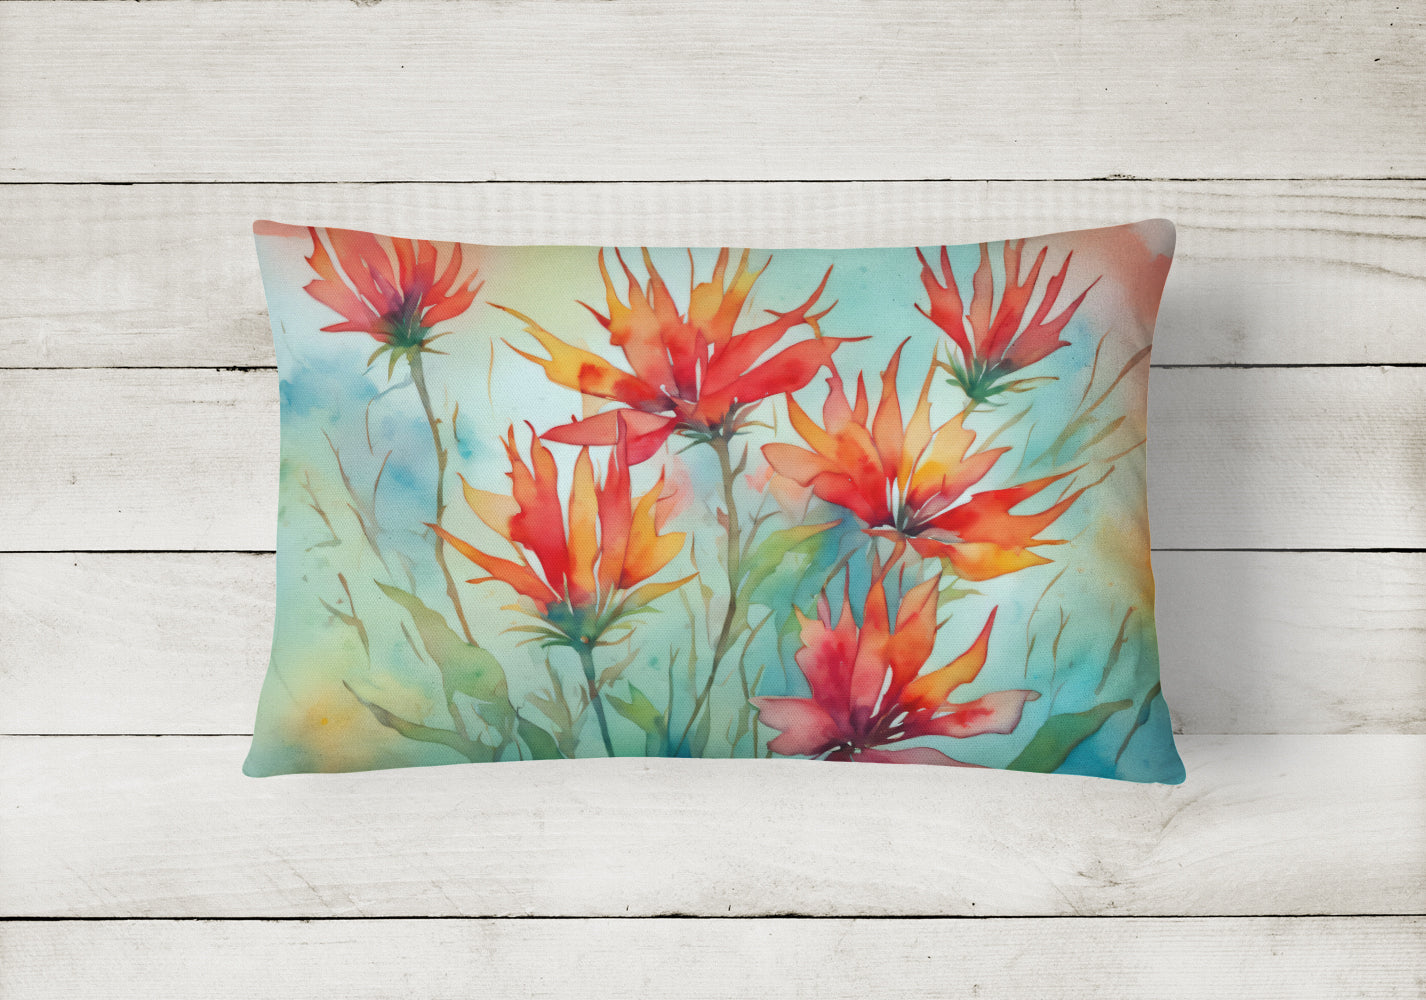 Buy this Wyoming Indian Paintbrush in Watercolor Fabric Decorative Pillow